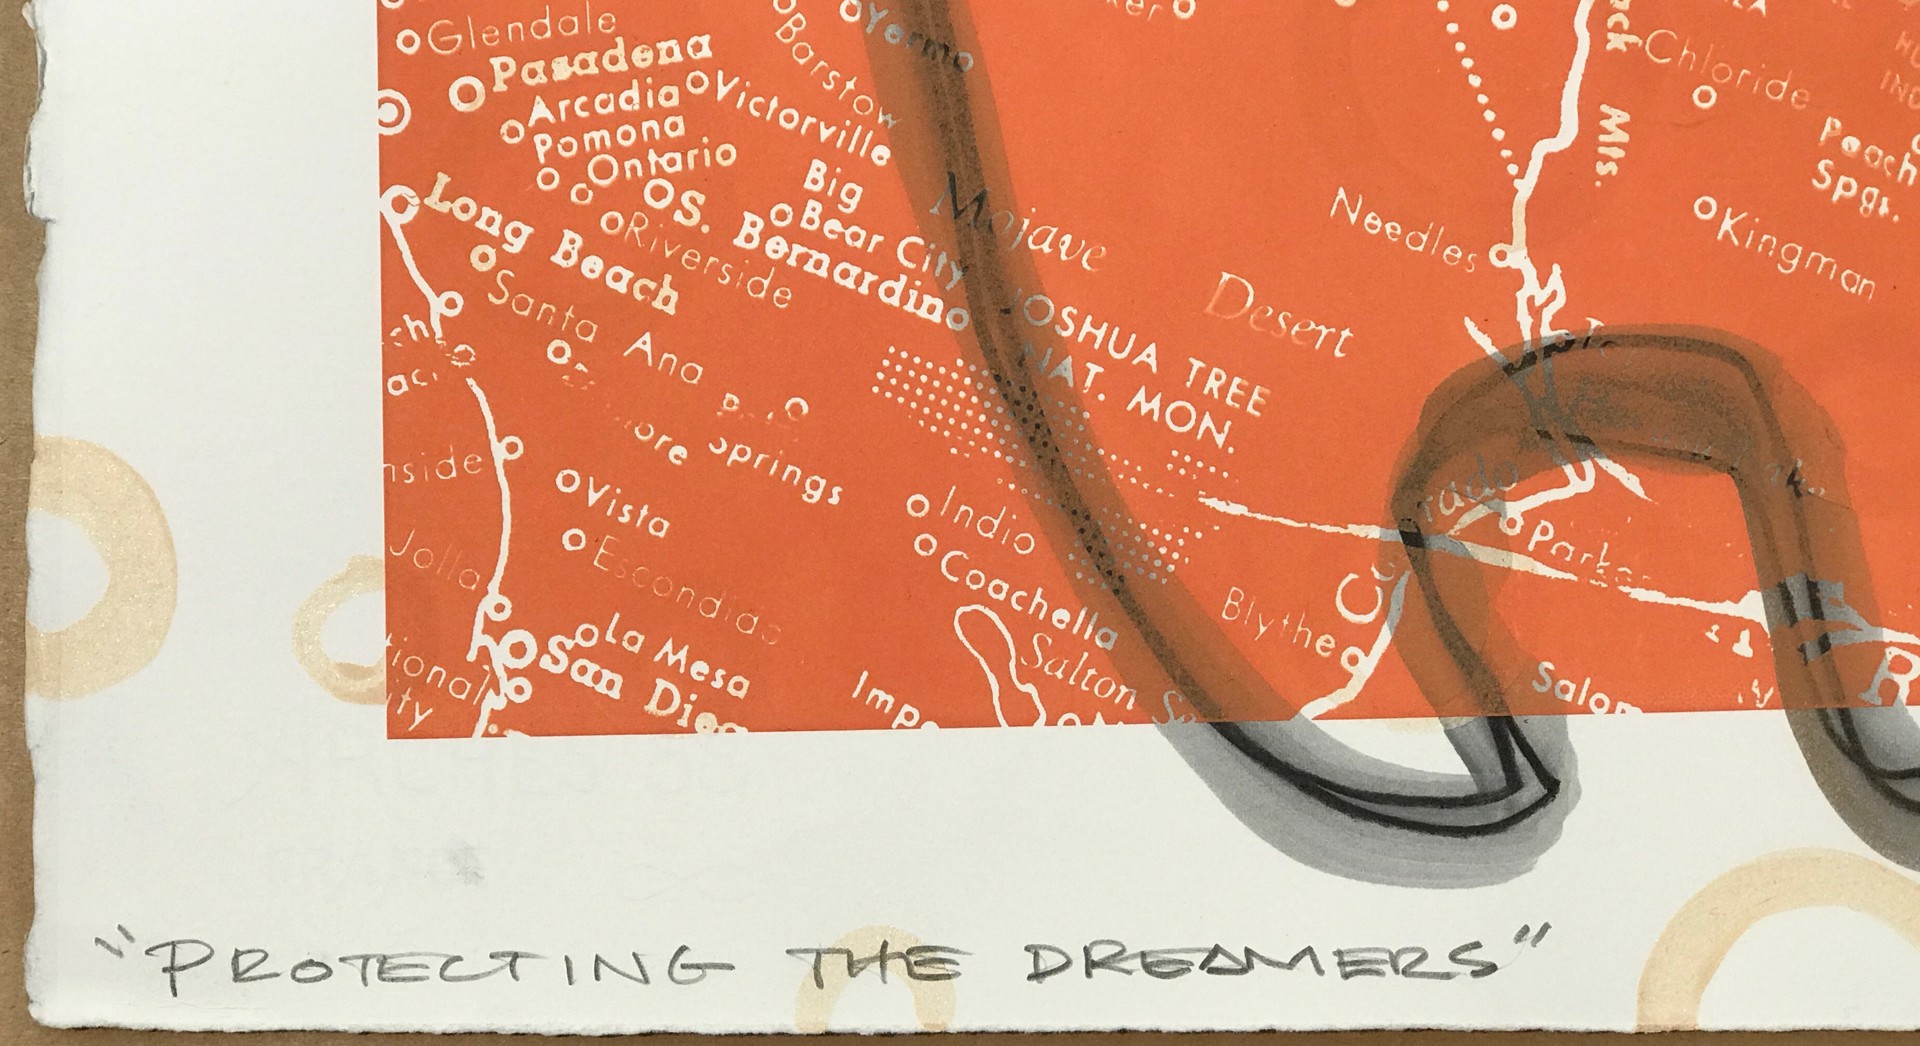 Protecting the Dreamers by Melanie A. Yazzie